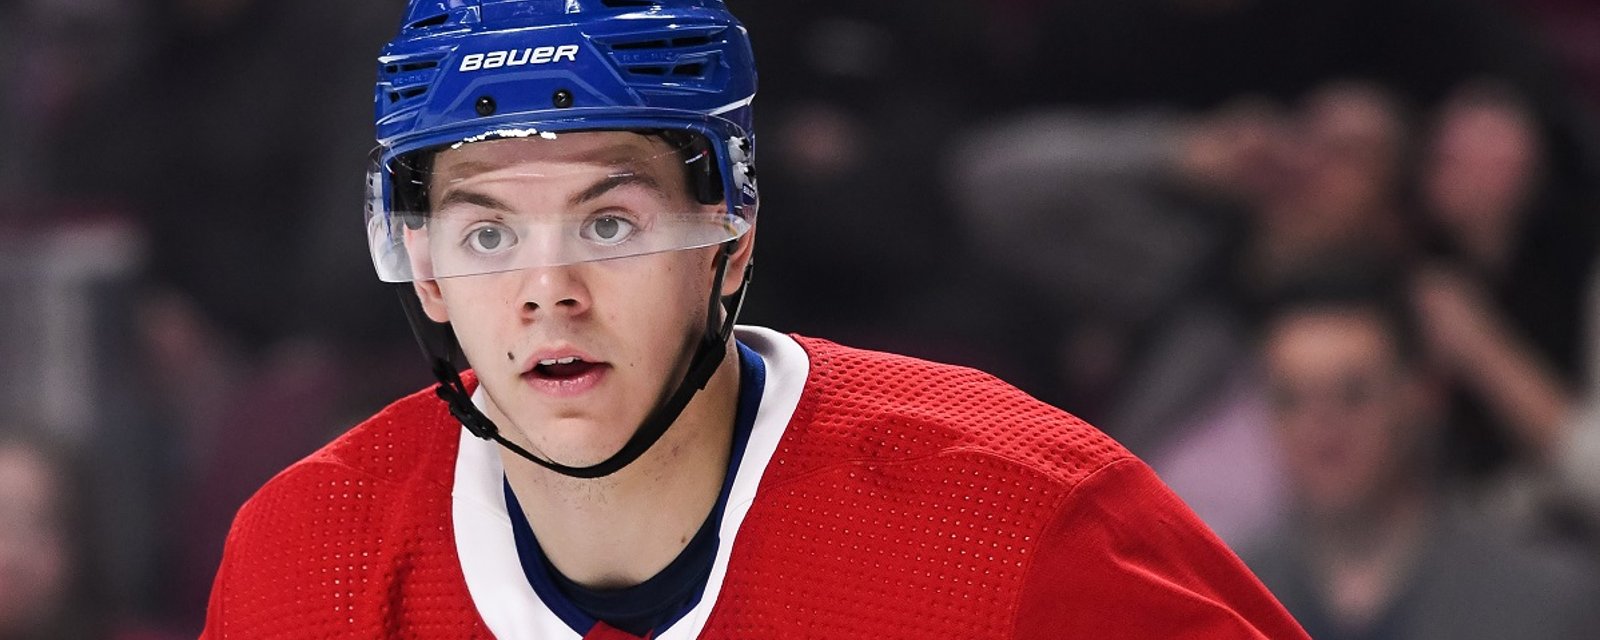 Habs scratch their star rookie ahead of hugely important game.